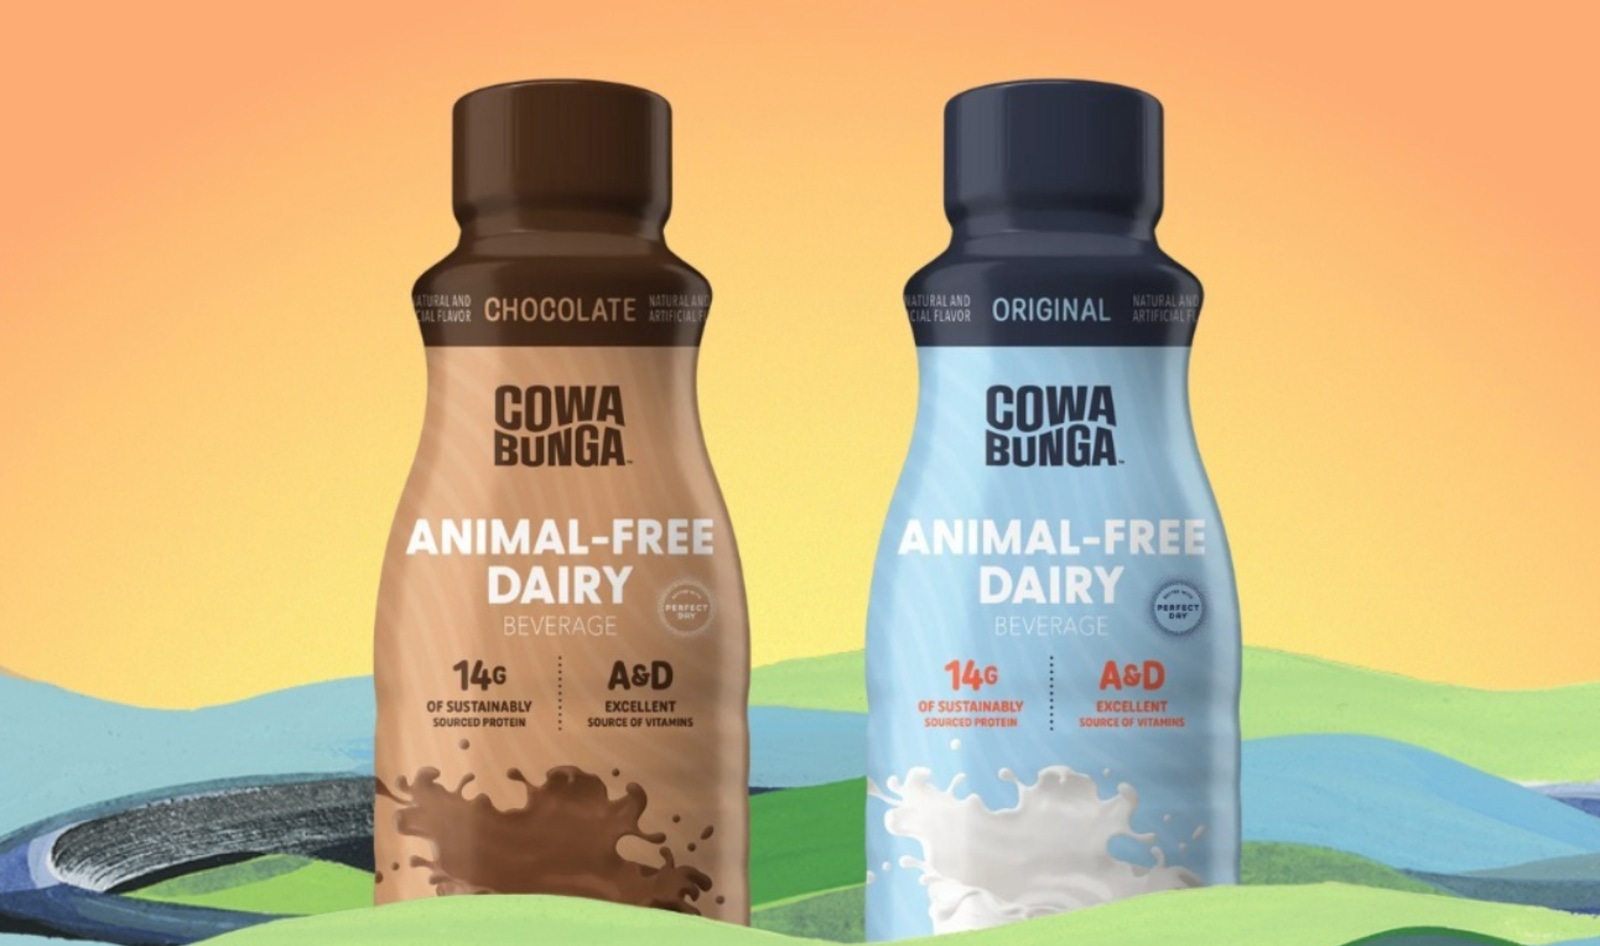 Nestlé's New Vegan Milk Made With Perfect Day's Animal-Free Whey Lands at 6 Stores